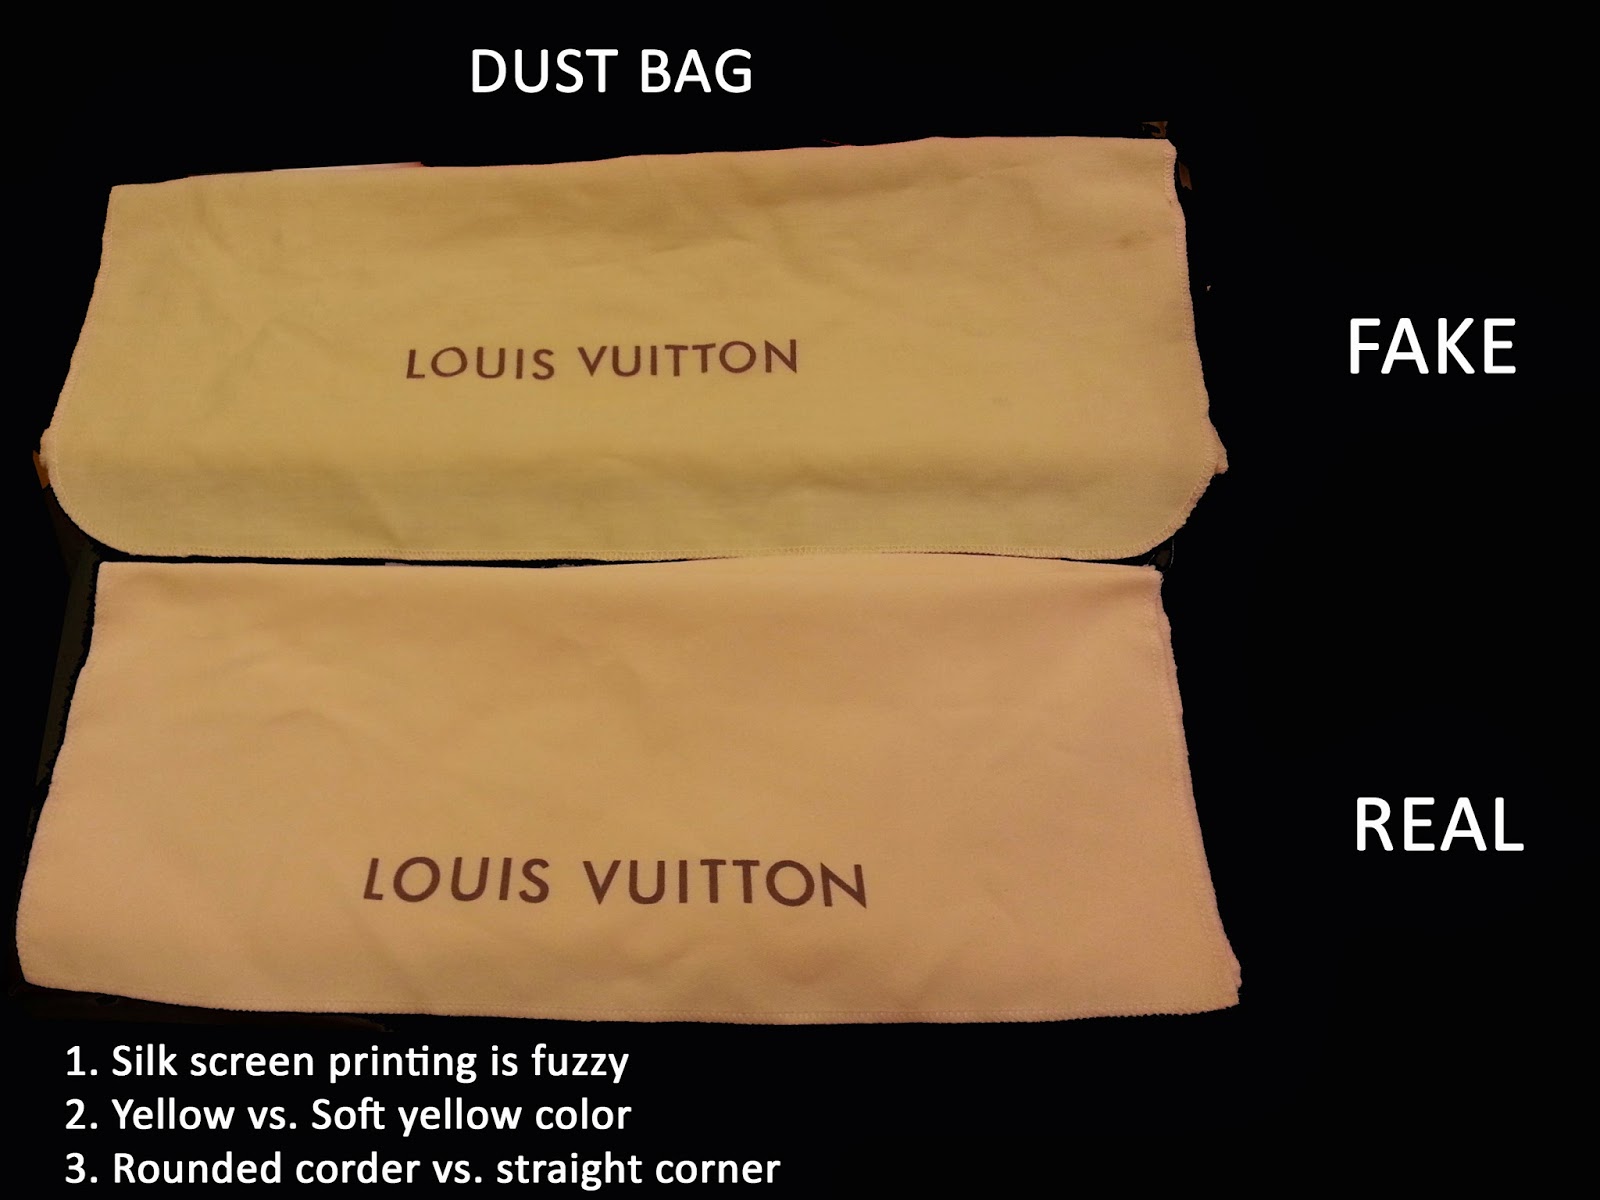 Replying to @alli.m8 #greenscreen how to tell a REAL louis vuitton